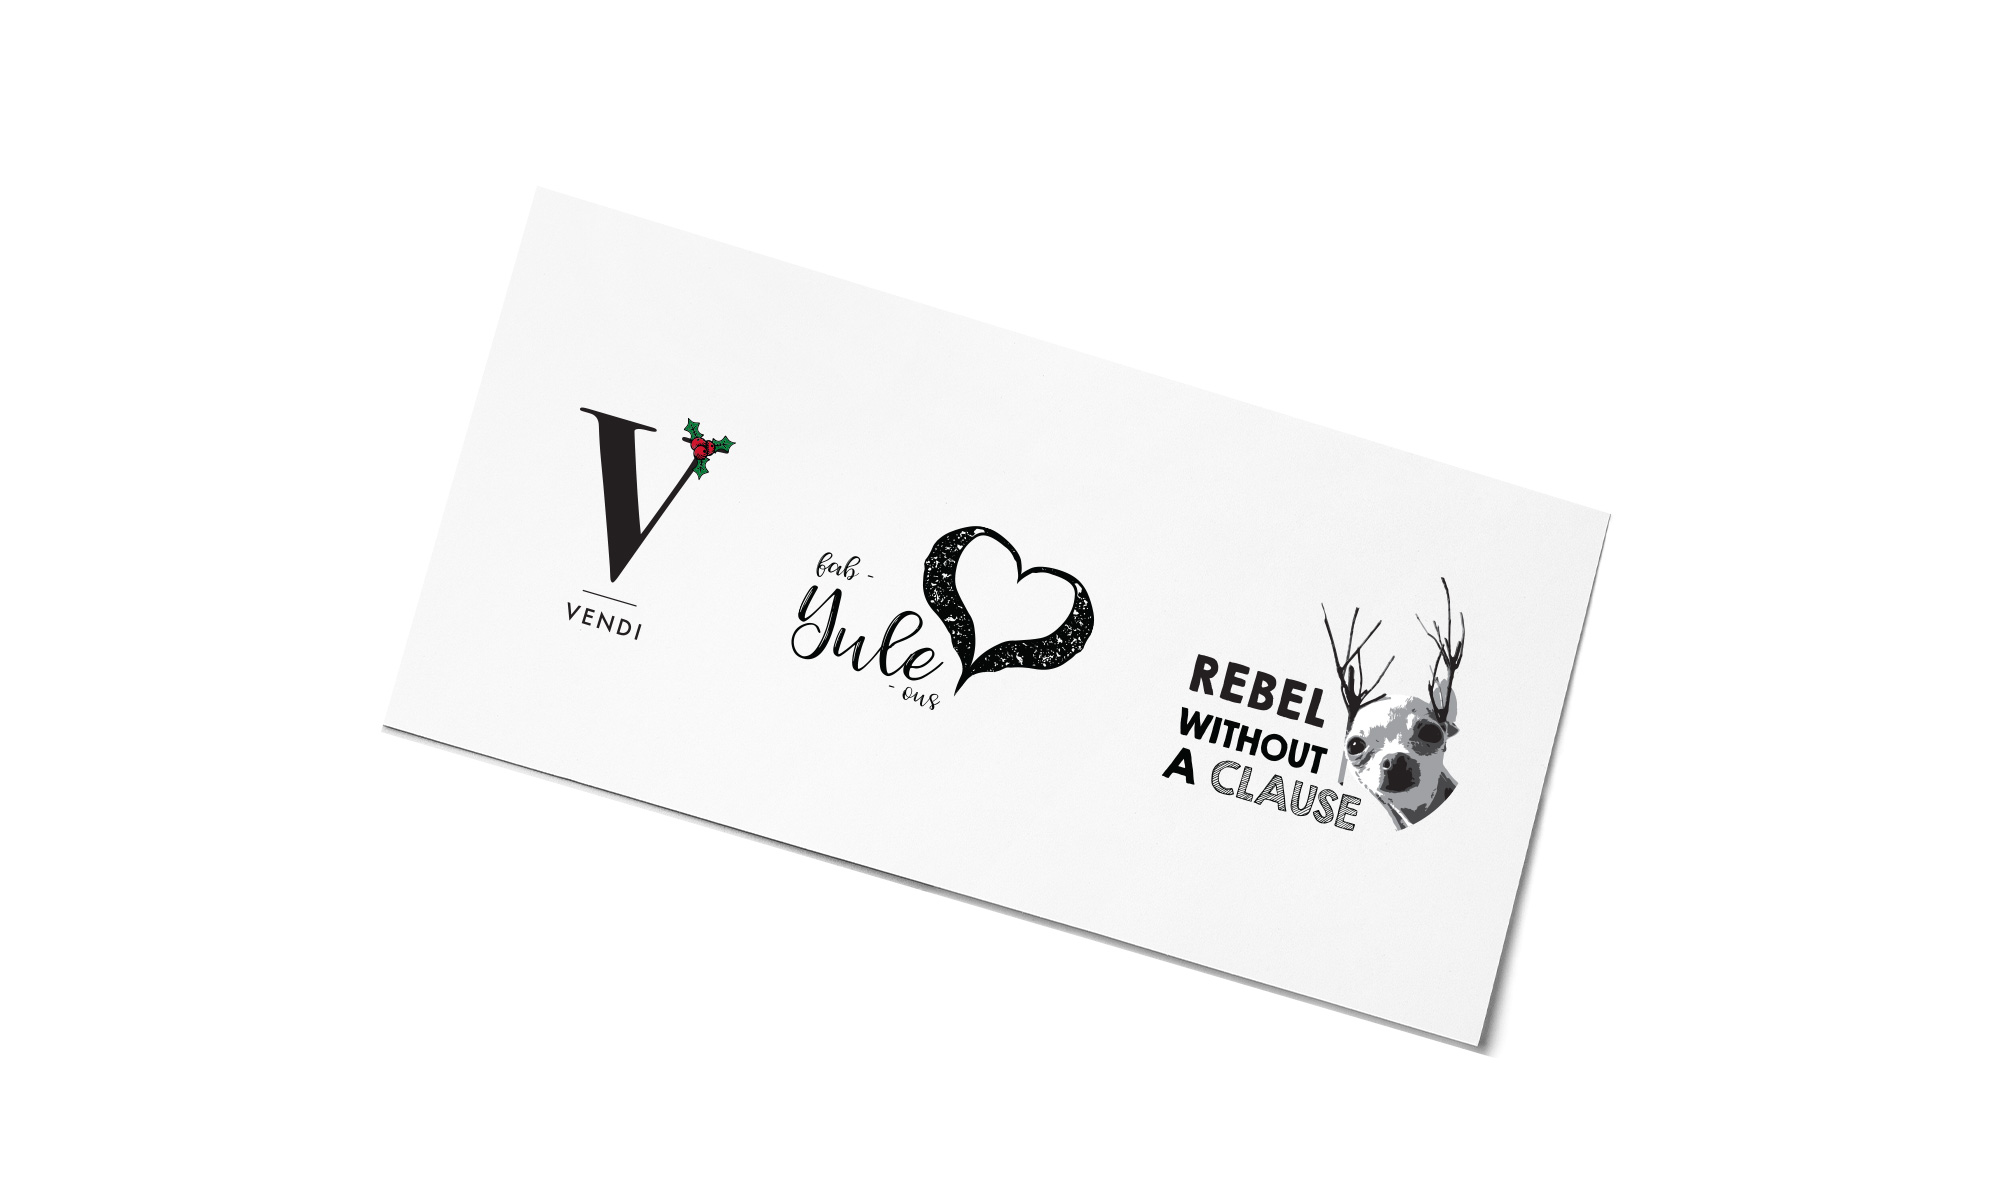 Temporary tats from Vendi’s 2019 card. The Vendi logo with holly, fab-yule-ous with a heart, Jangle rebel without a clause.